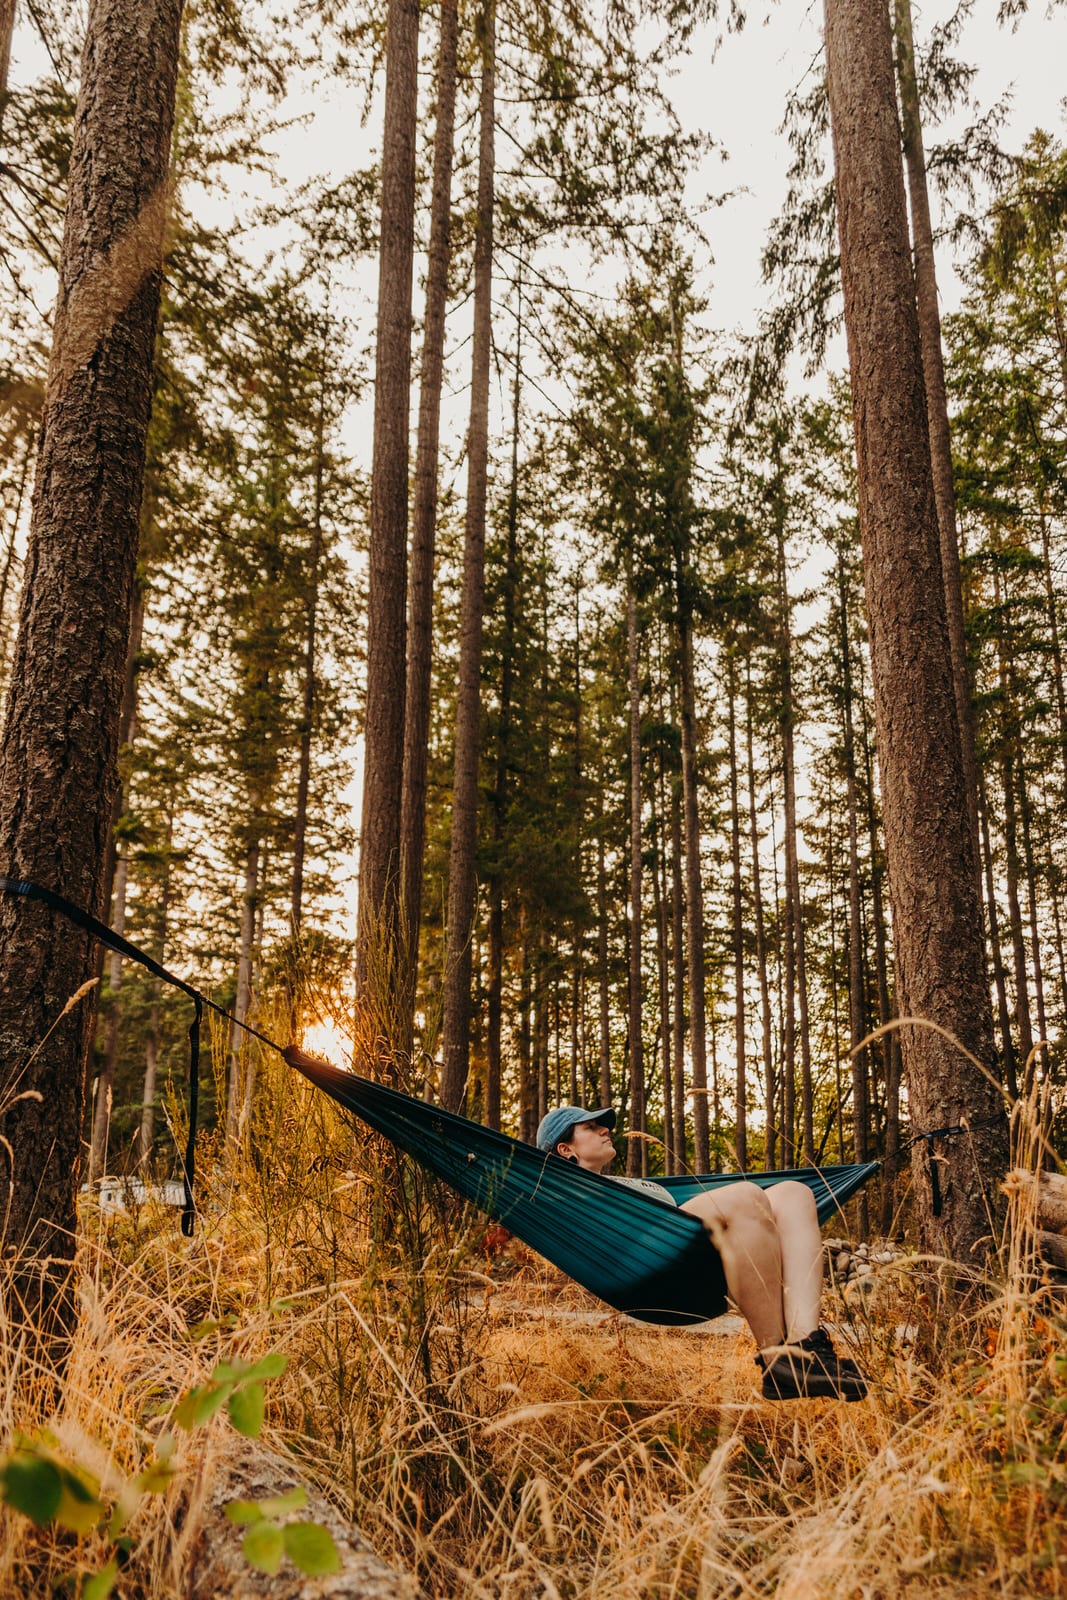 Great trees for putting out your hammock!